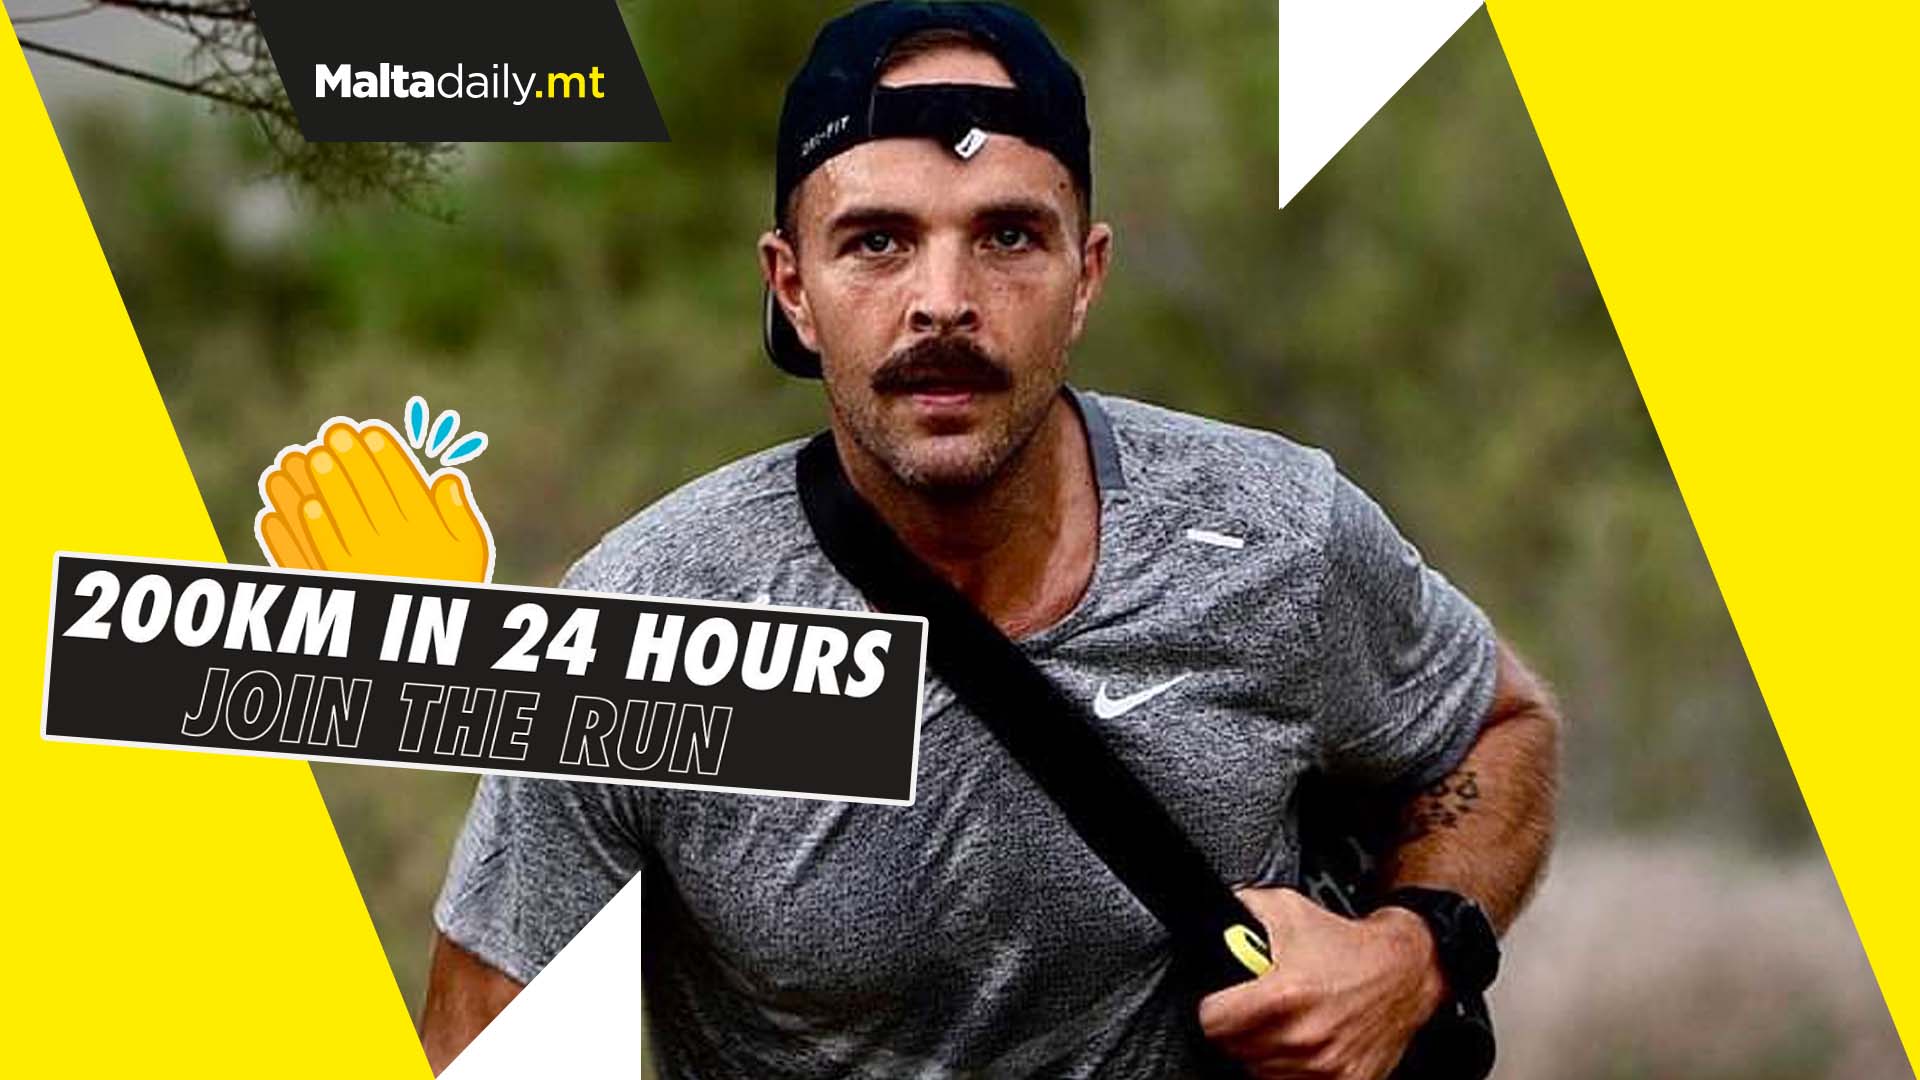 Athlete to embark on 24 hour run to donate to Soup Kitchen